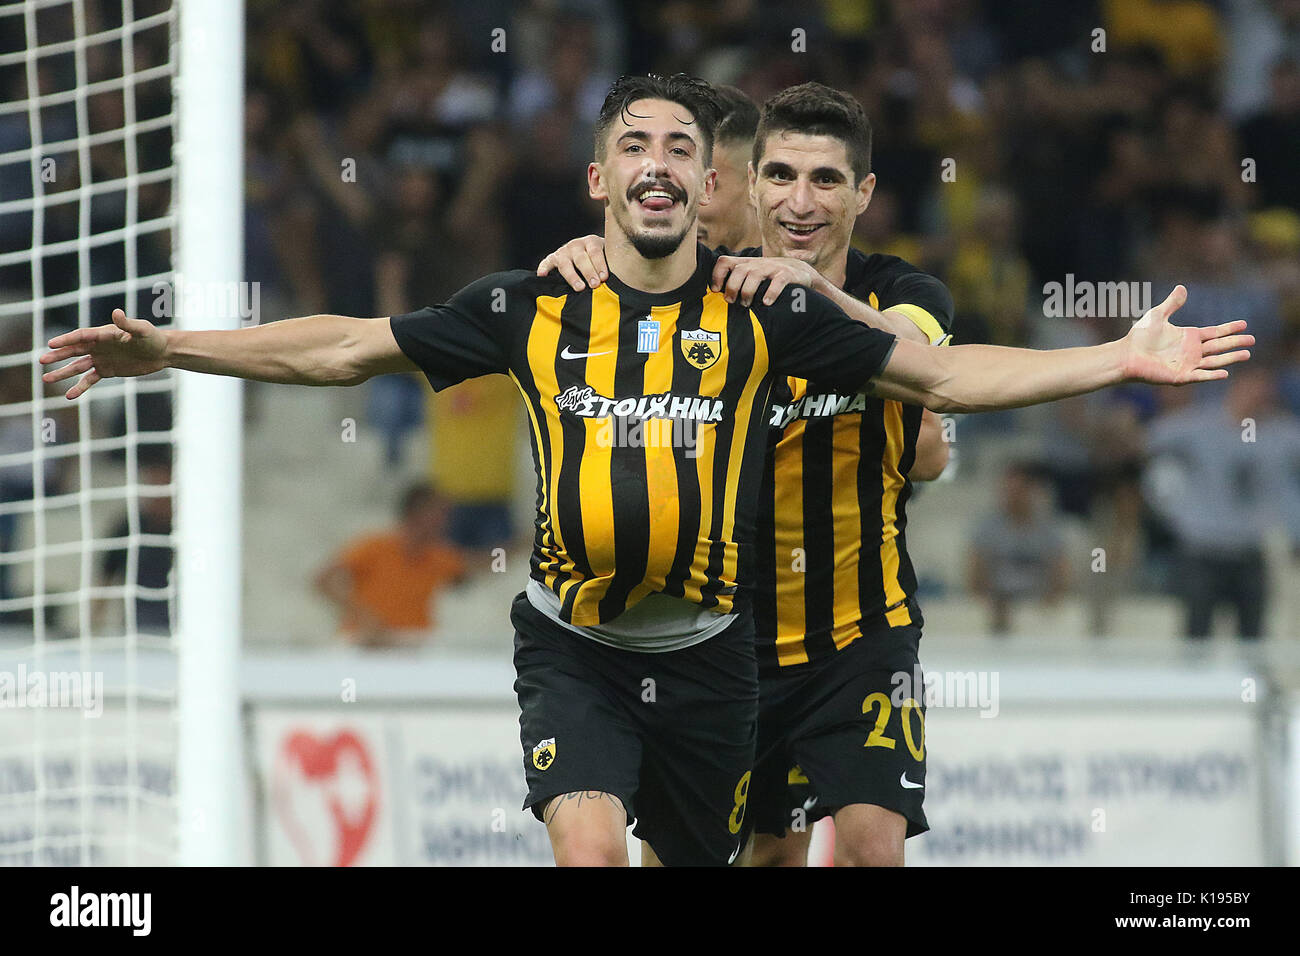 Athens, Greece. 24th Aug, 2017. Andre Simoes celebrates after scoring goal  during the UEFA Europa league play-off second leg soccer match between Club  Brugge and AEK Athens at the Olympic stadium. Final